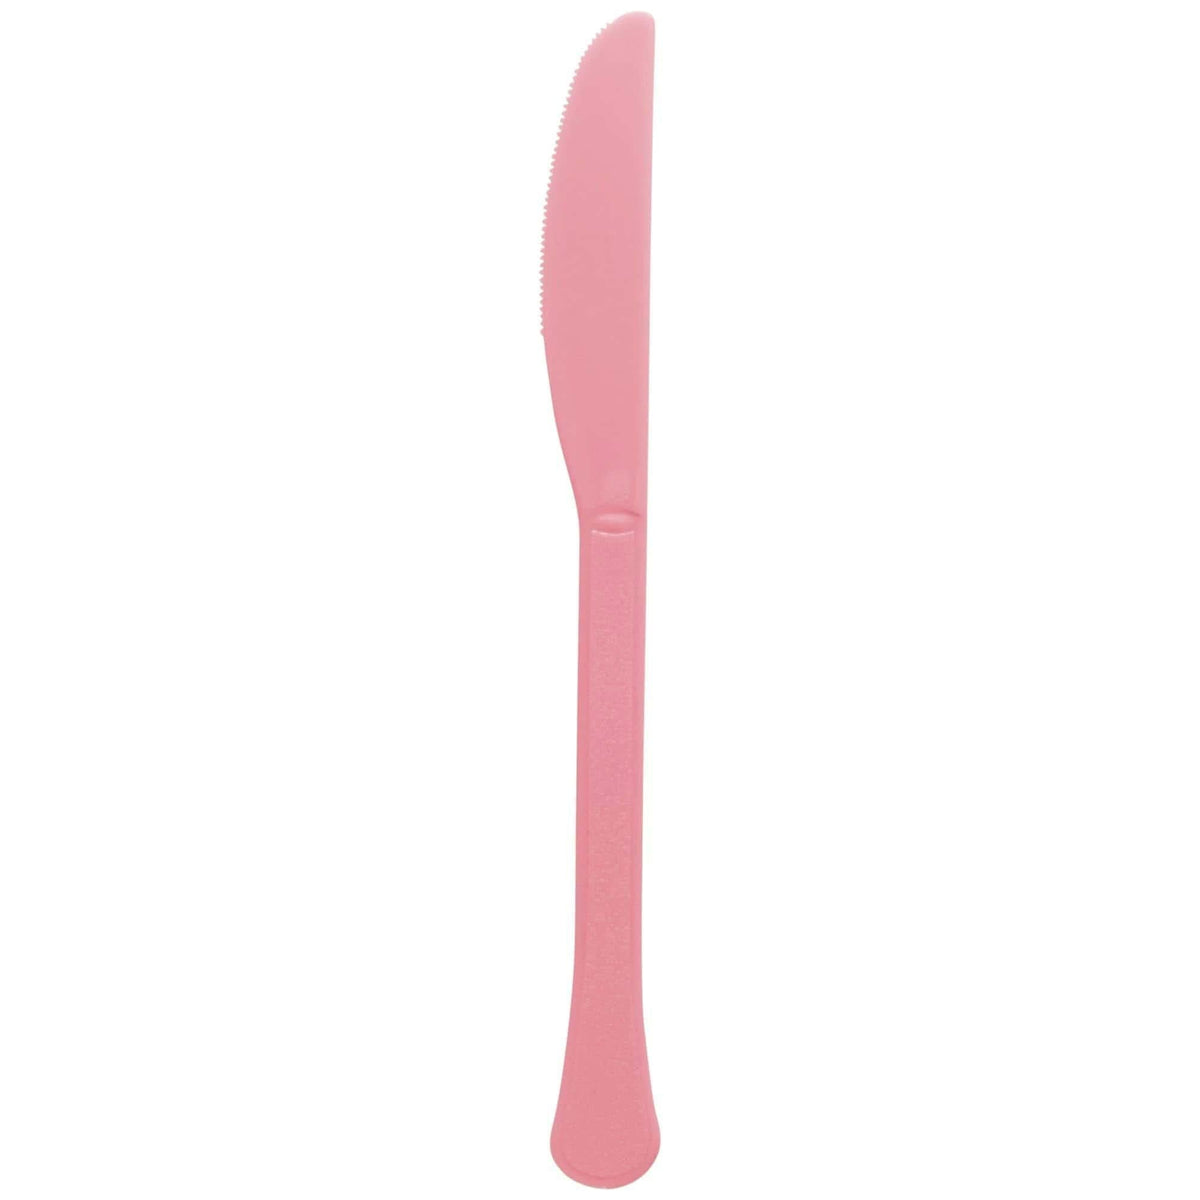 Buy plasticware New Pink Plastic Knives, 20 Count sold at Party Expert